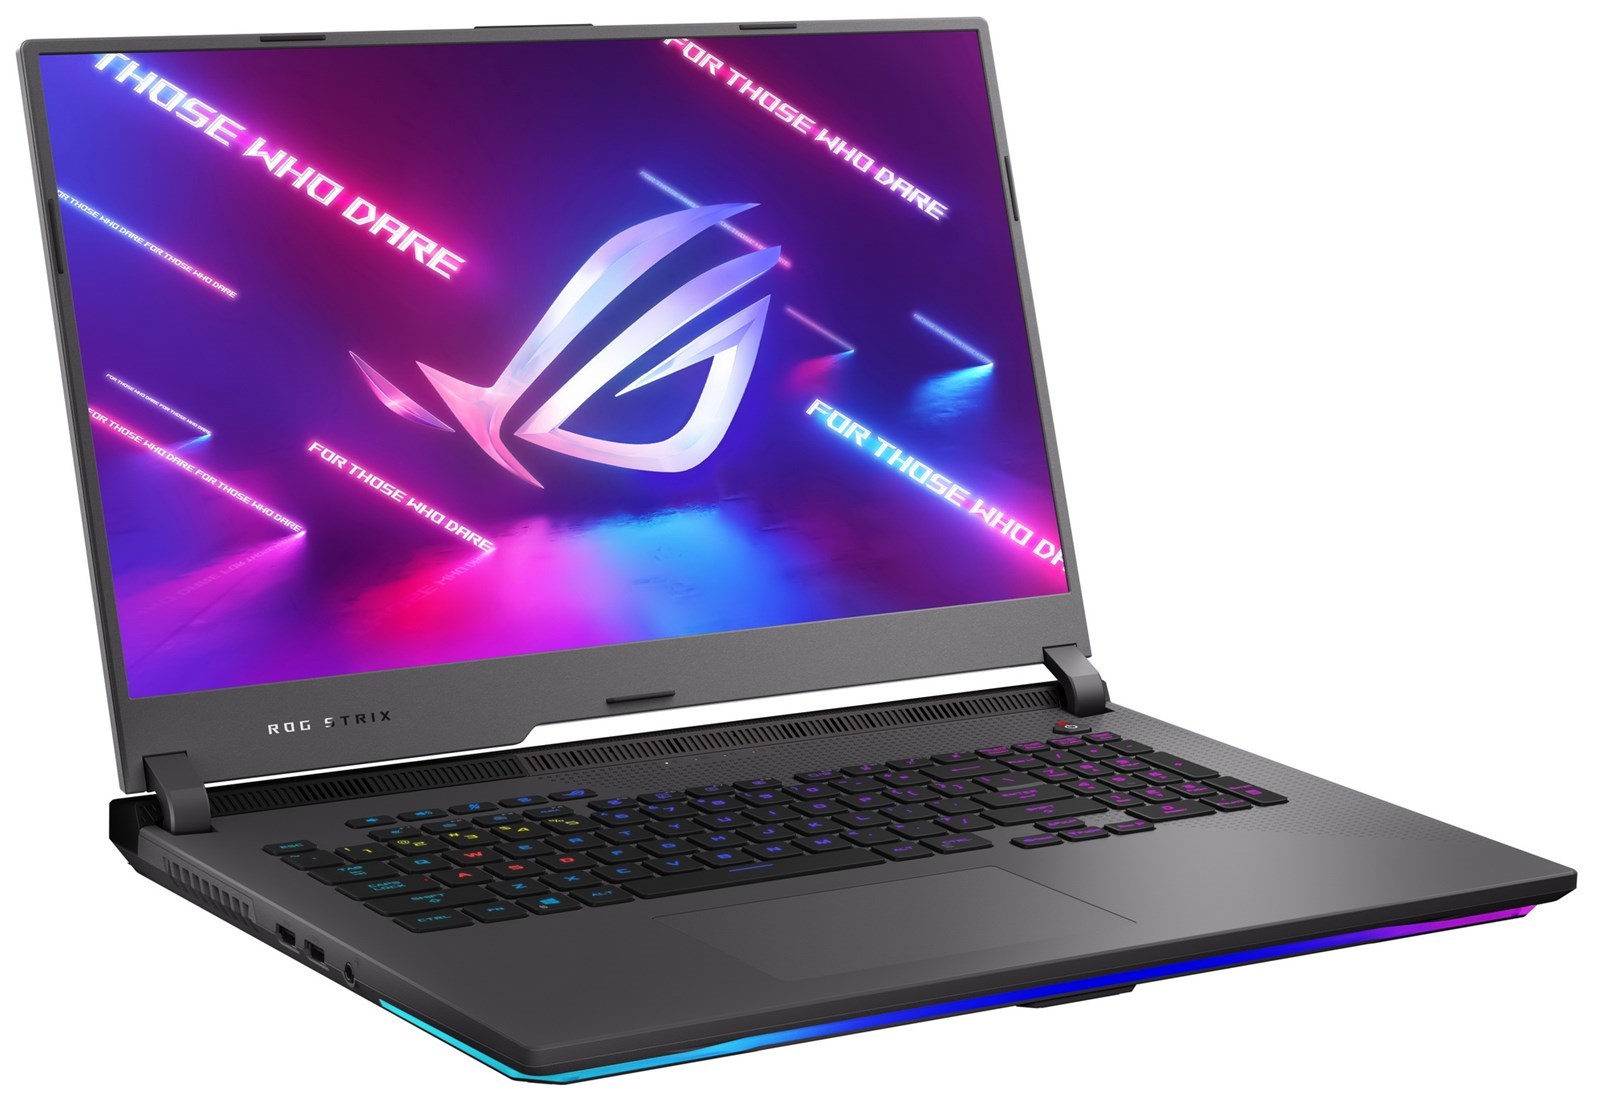 Pre-orders for Asus ROG Strix G17 with GeForce RTX 3060 and Ryzen 7 5800H now live at $1499 USD - Notebookcheck.net